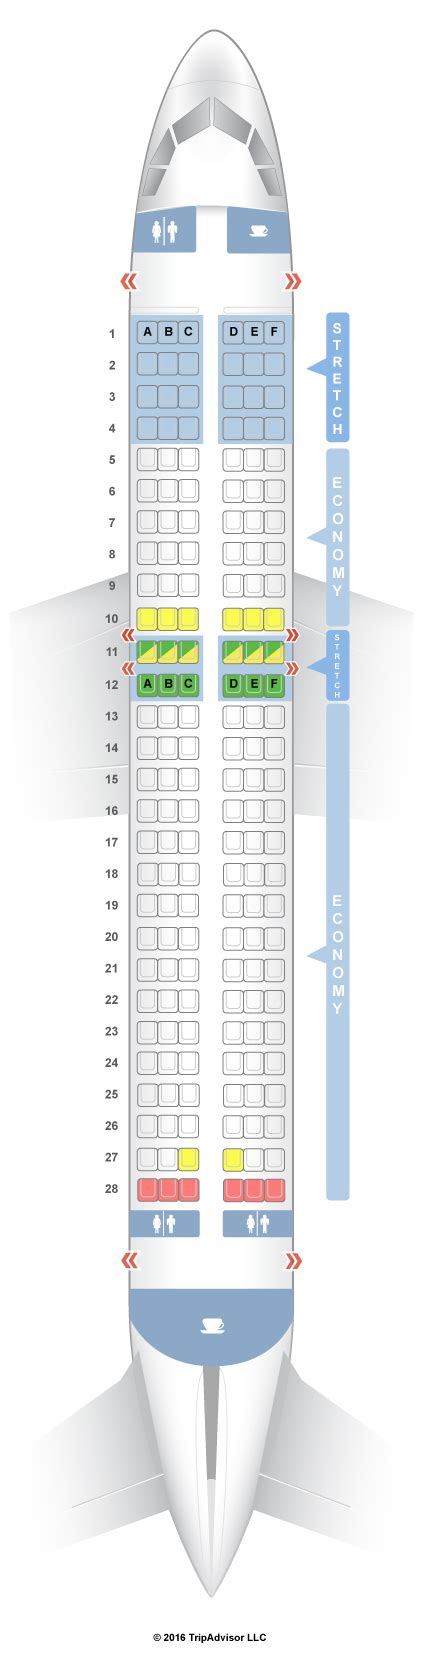 Frontier a320 seating. Things To Know About Frontier a320 seating. 